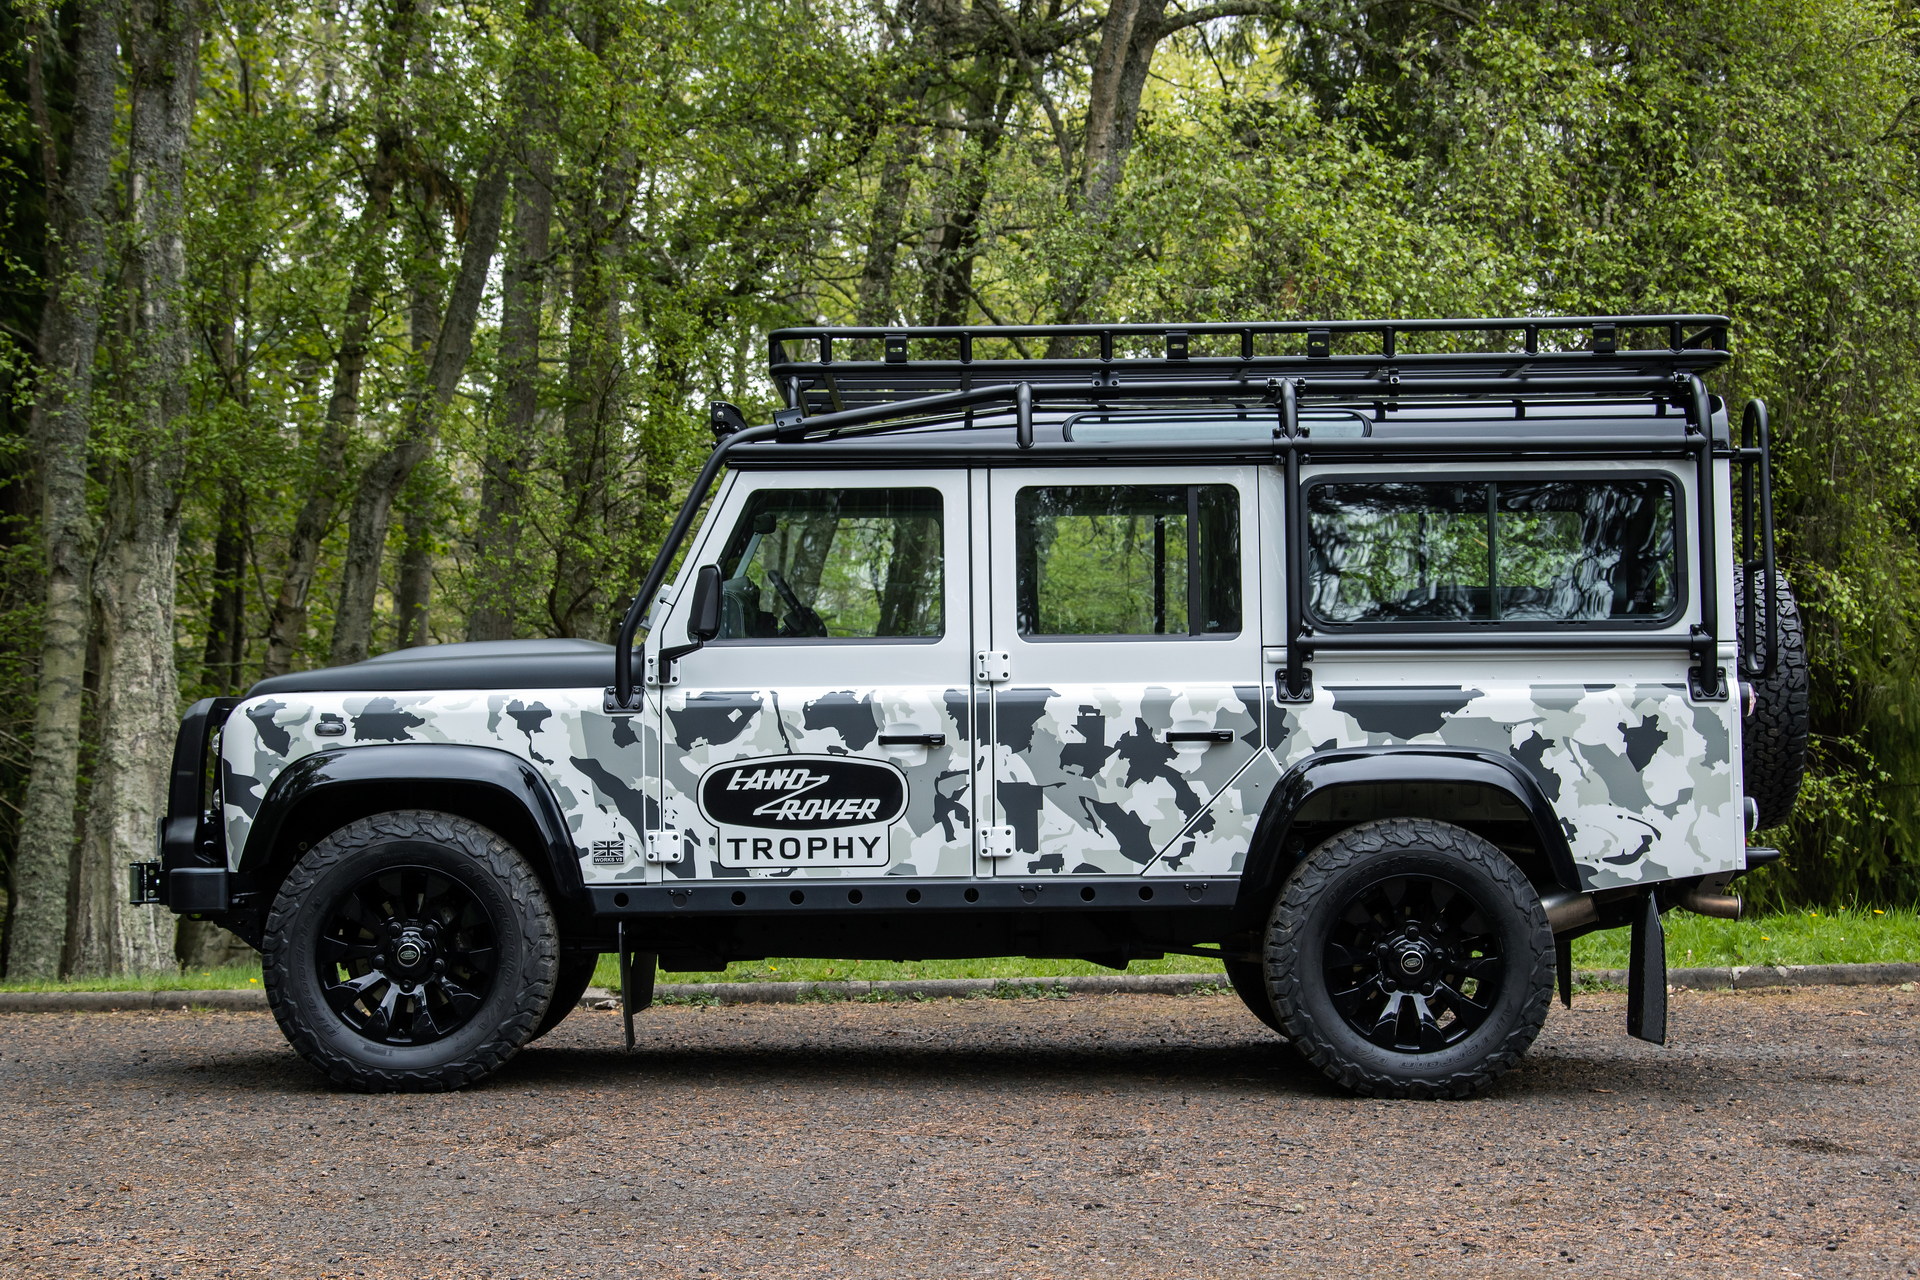 2022 Land Rover Classic Defender Works V8 Trophy II 3 - Auto Recent